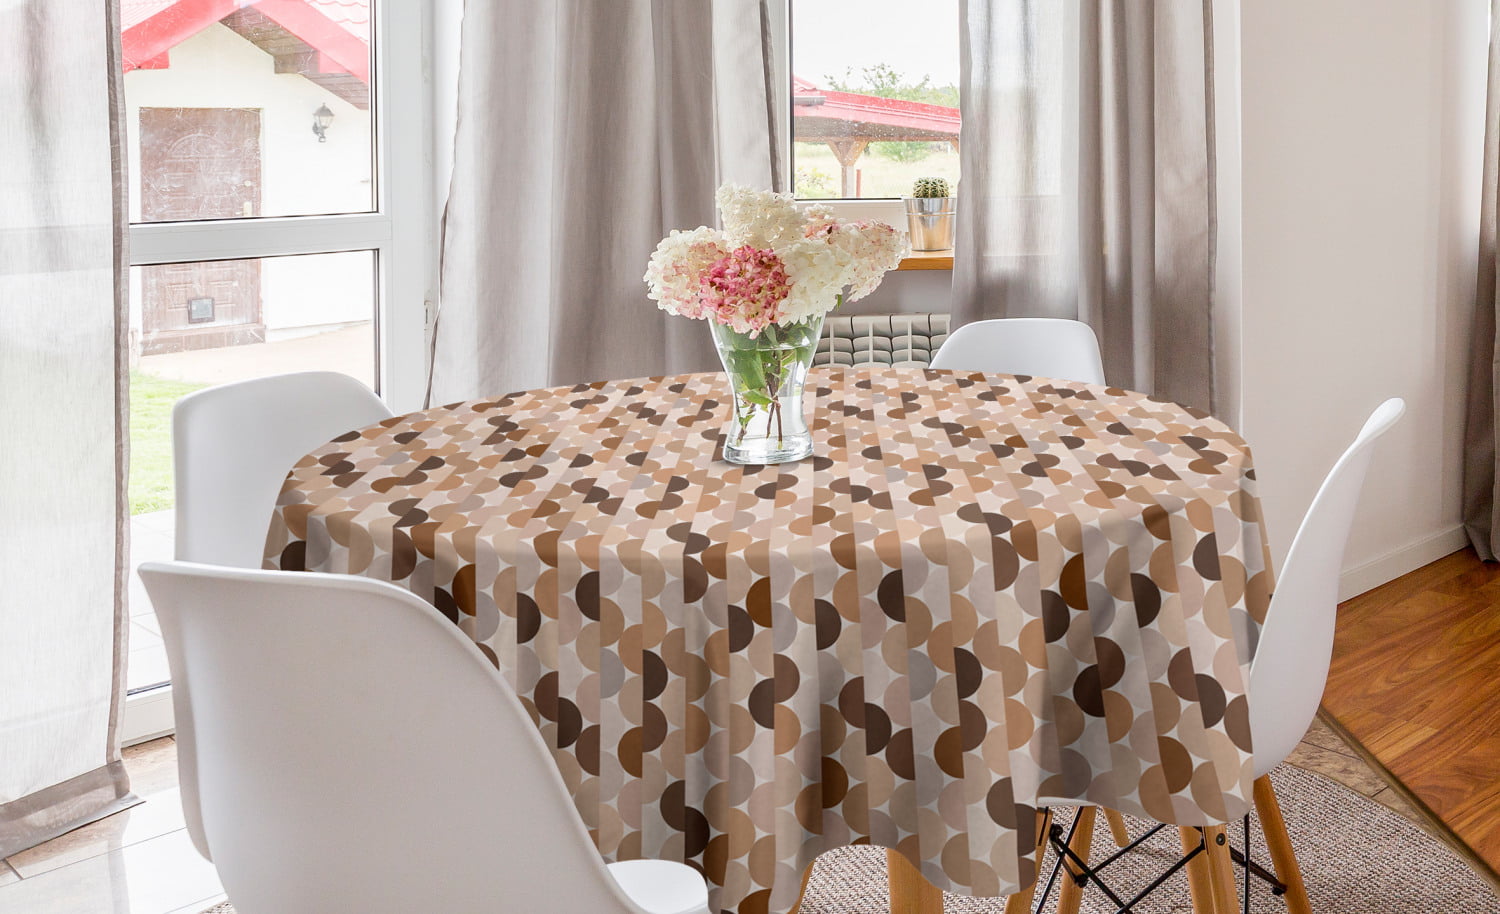 Abstract Round Tablecloth, Semicircles or Half Round in Brown Tones